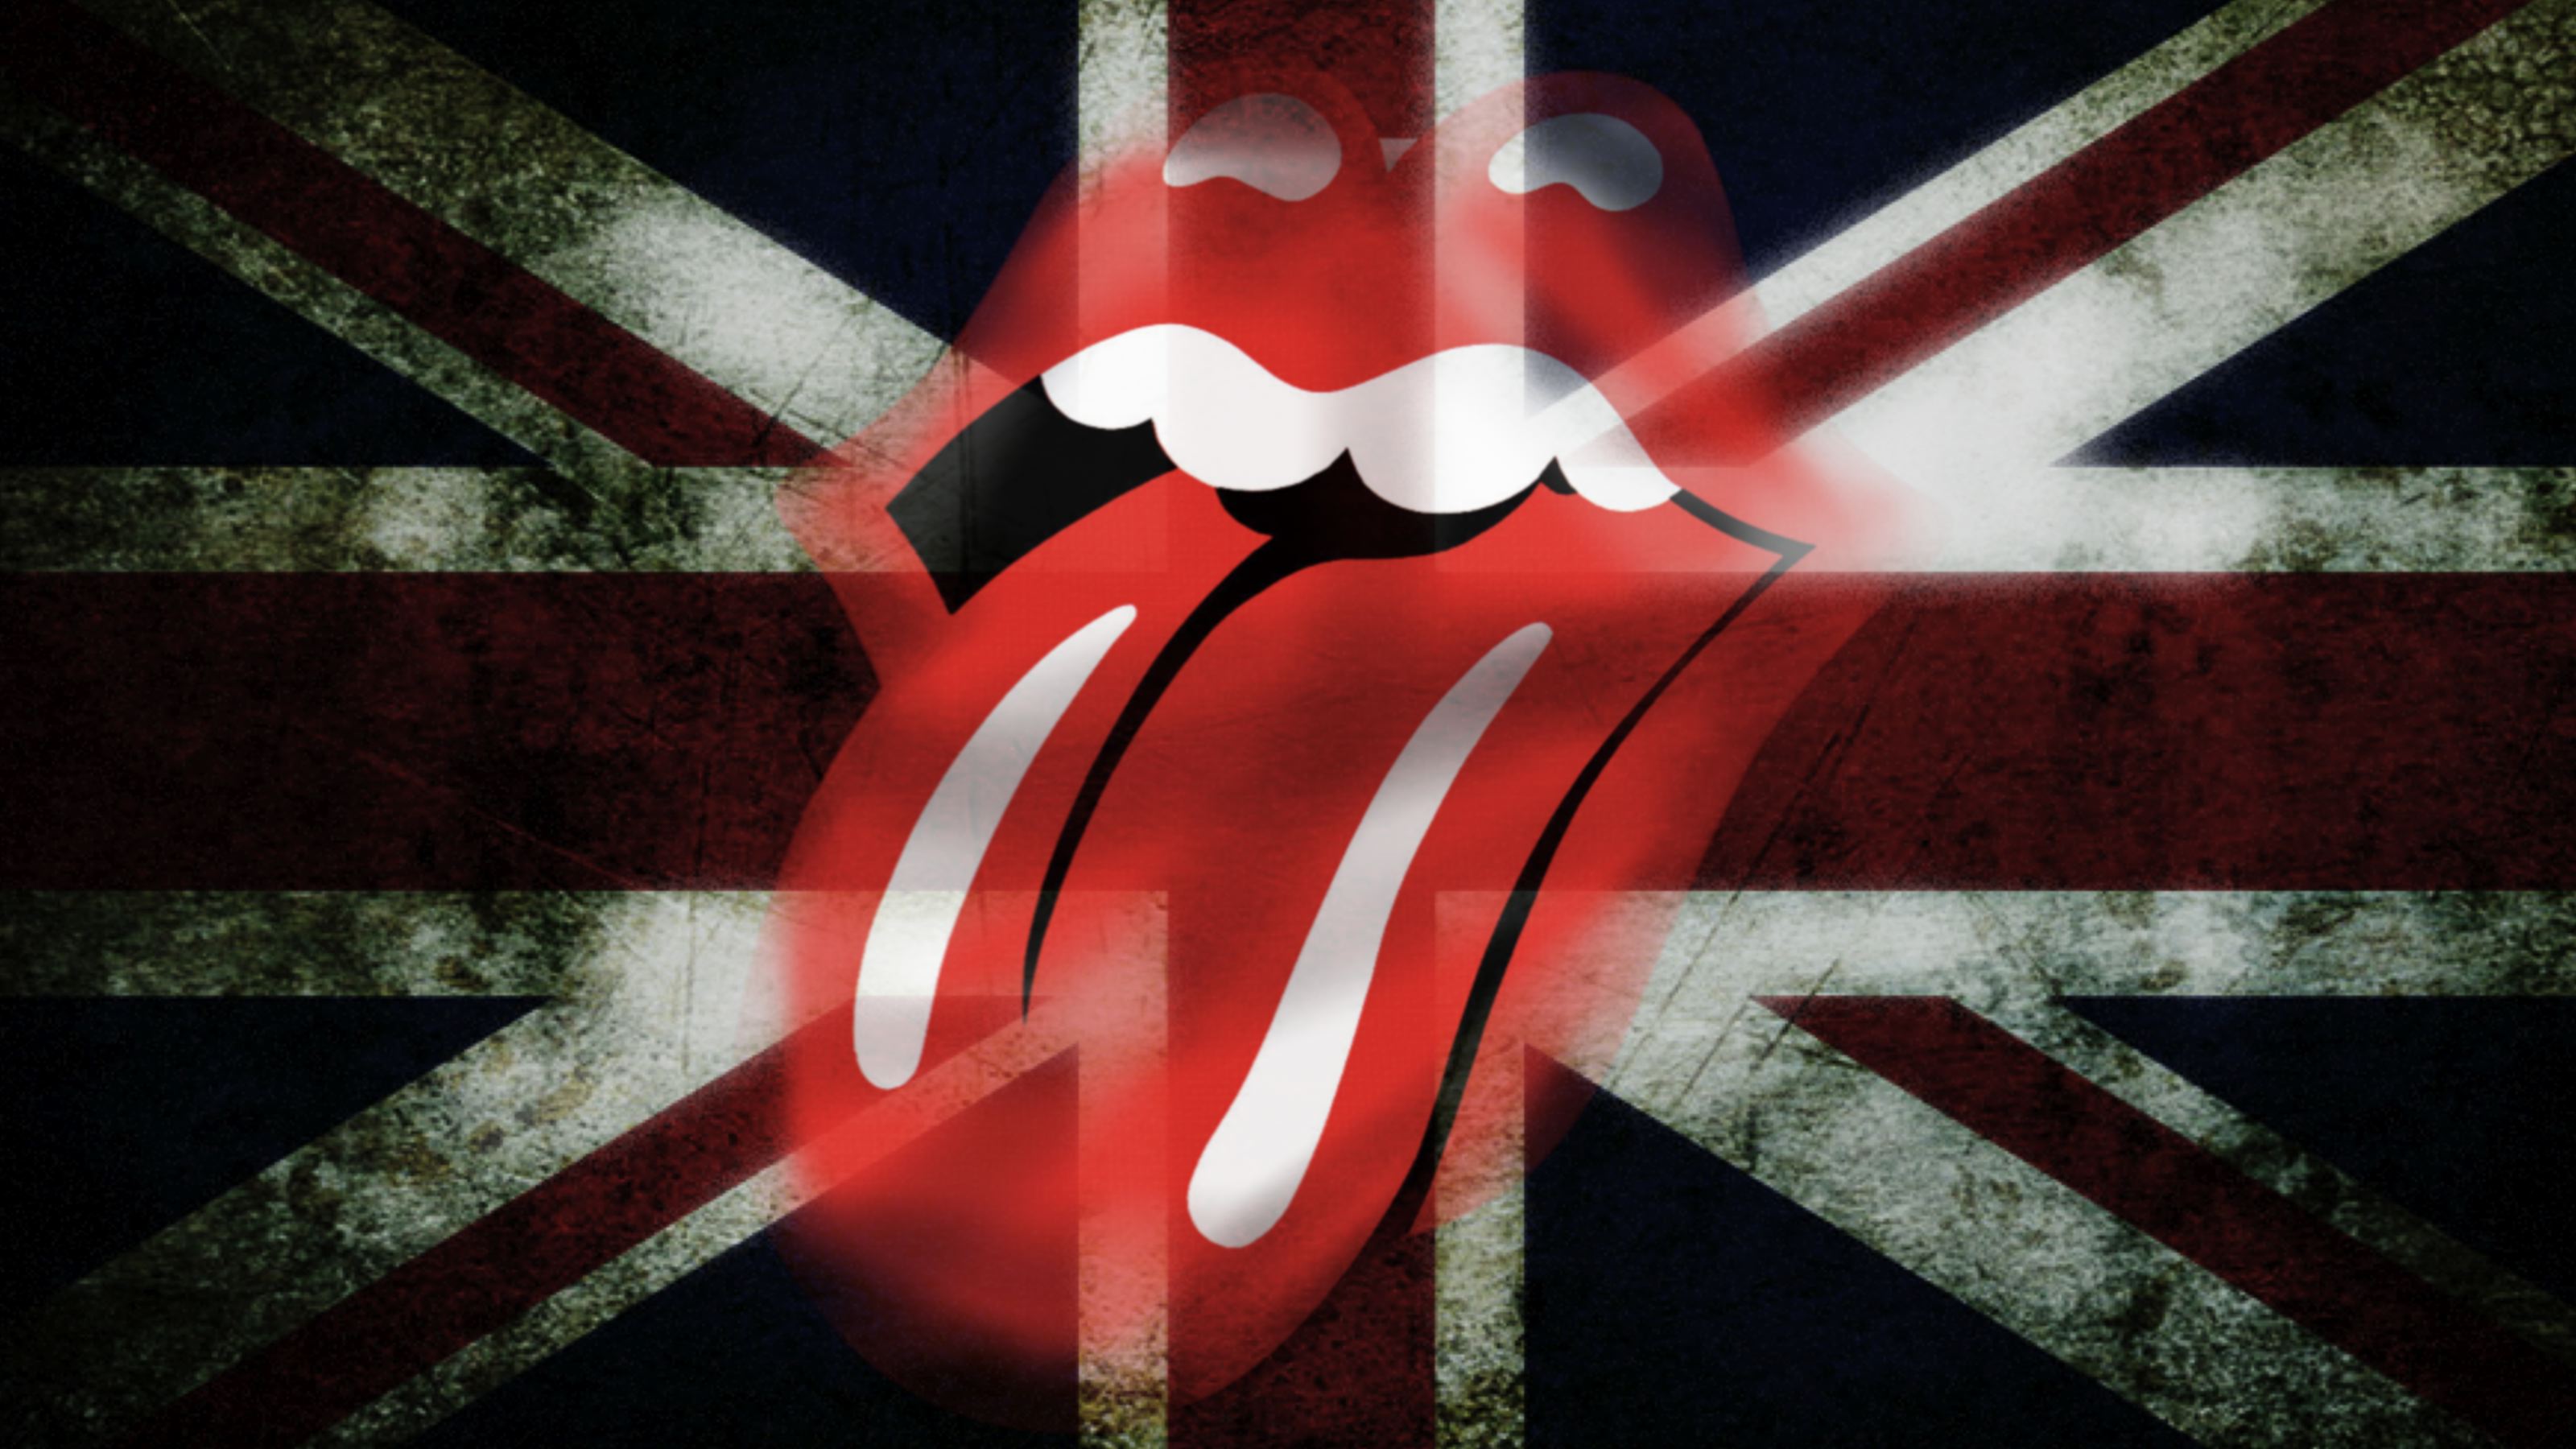 The Rolling Stones Logo Wallpaper The rolling stones 3200x1800